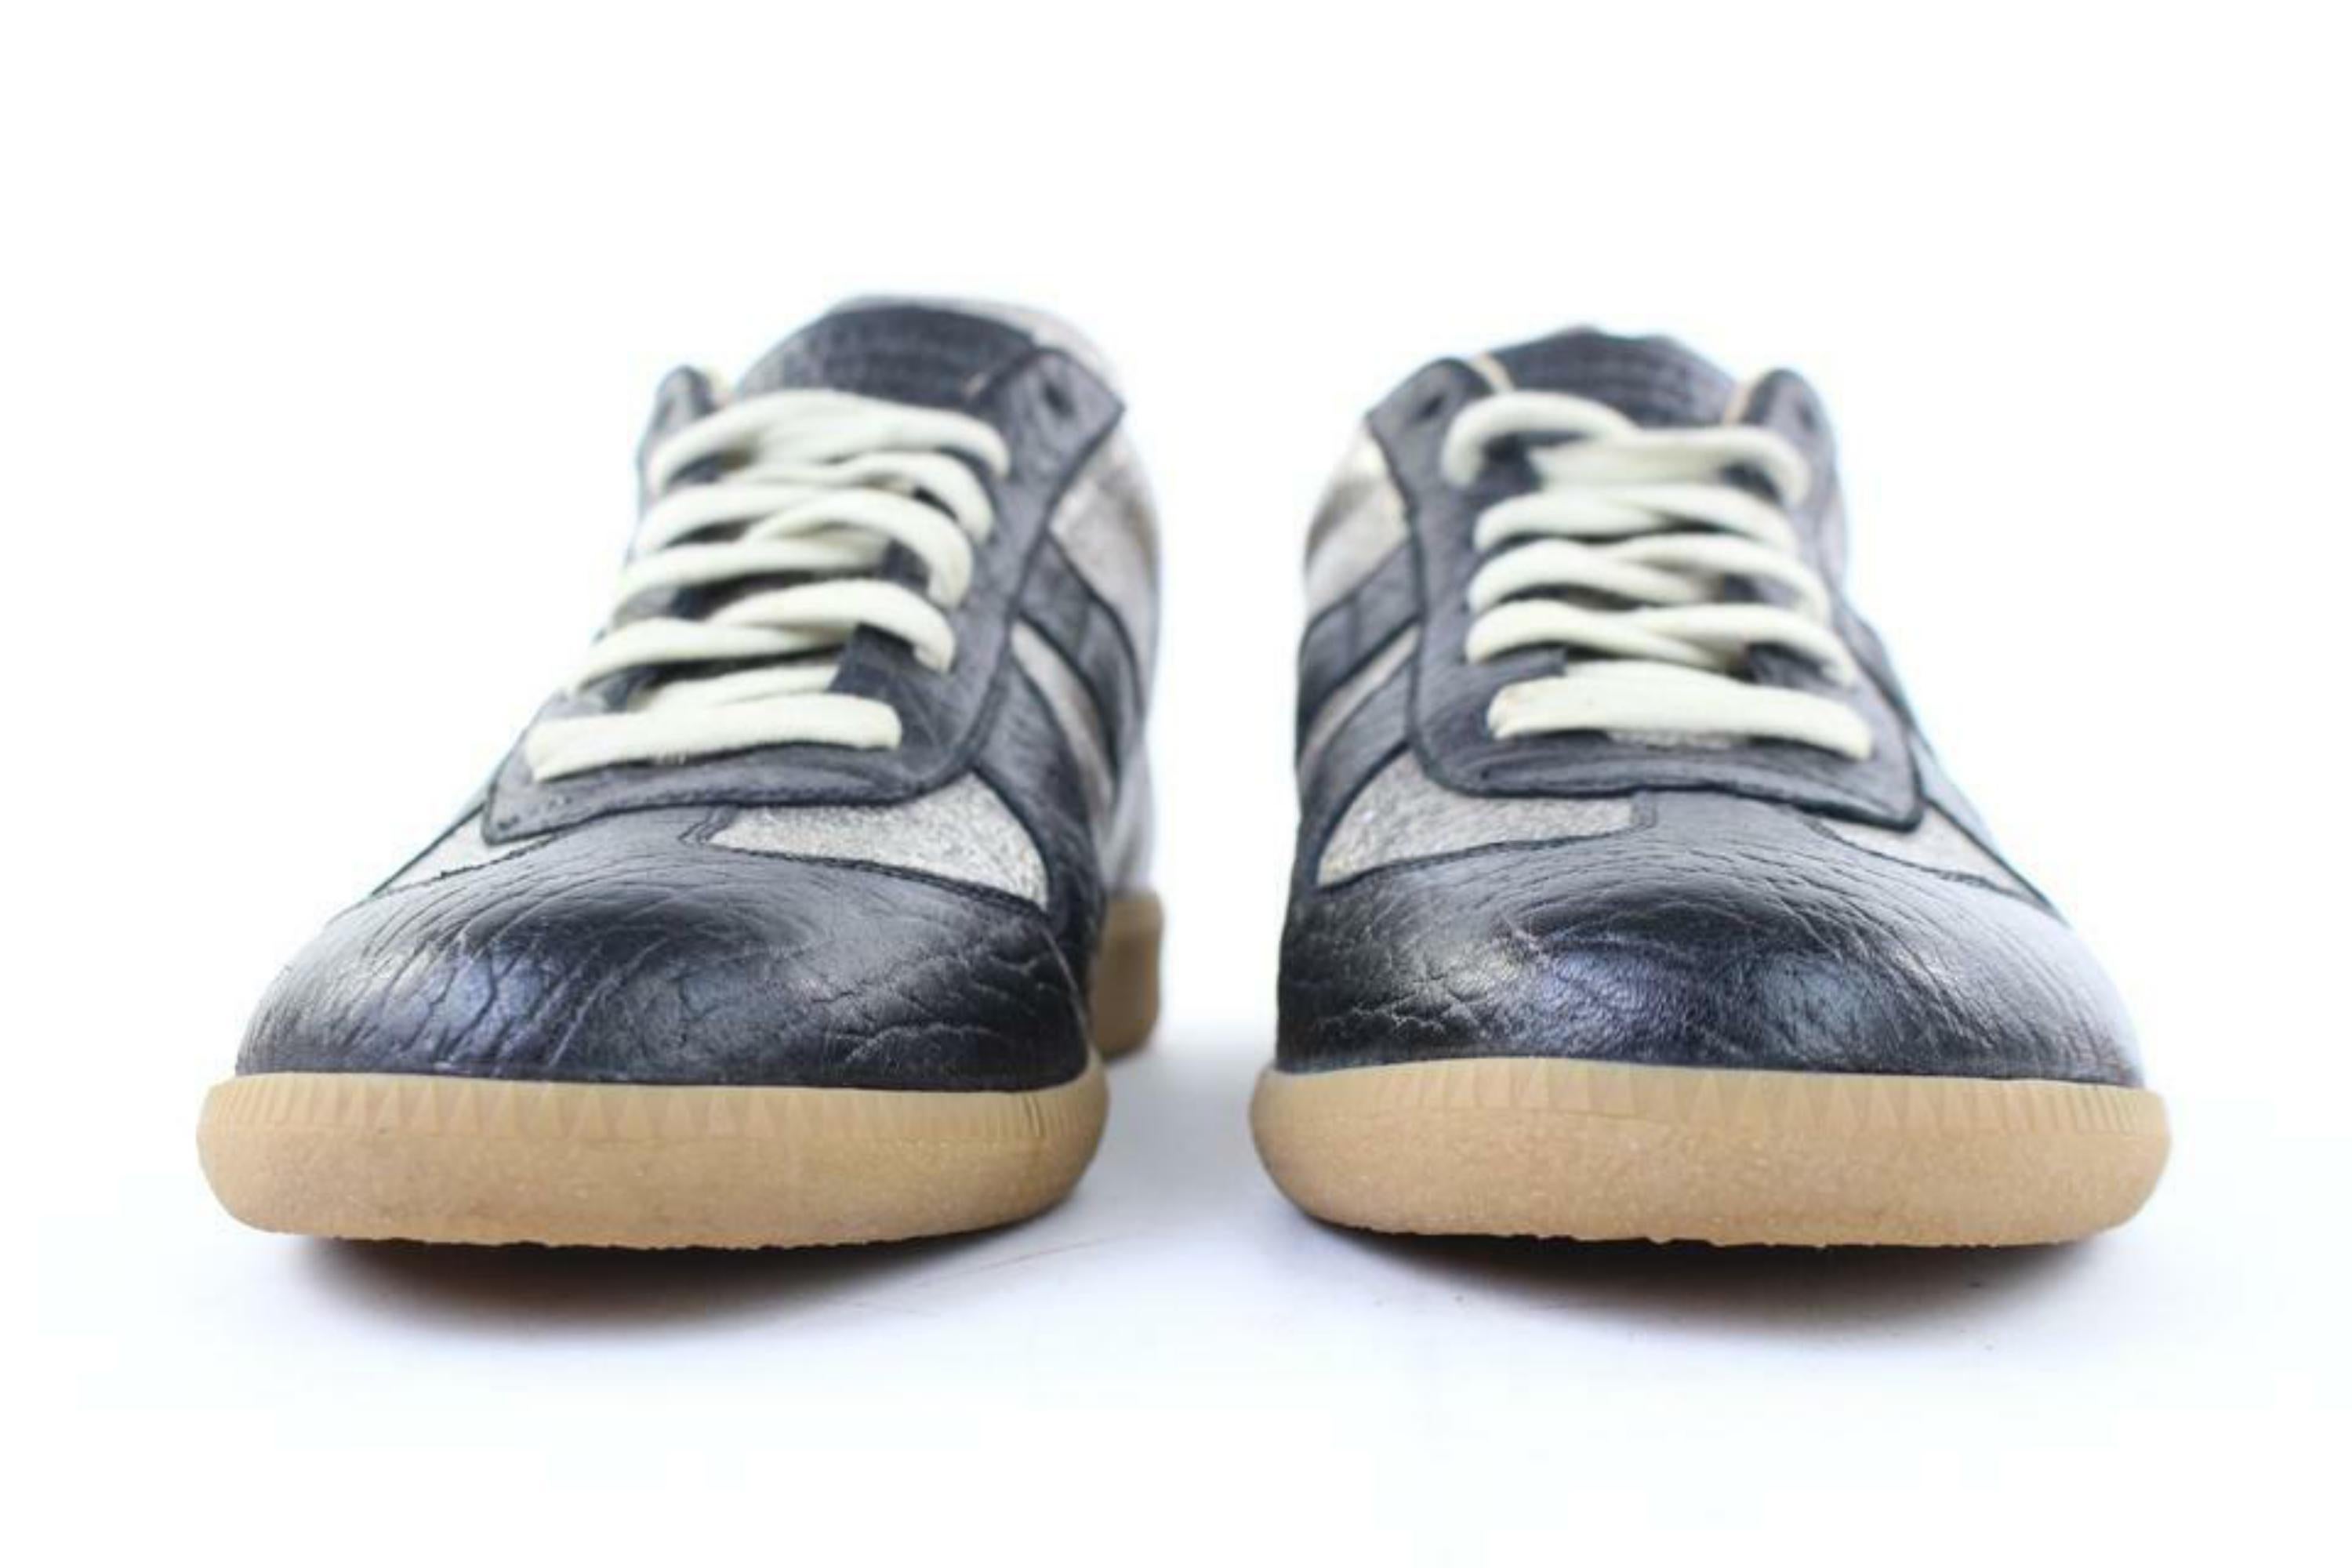 Maison Martin Margiela Mens sz 40 Silver x Black Leather Replica Sneaker 2MM1014 In Excellent Condition For Sale In Dix hills, NY